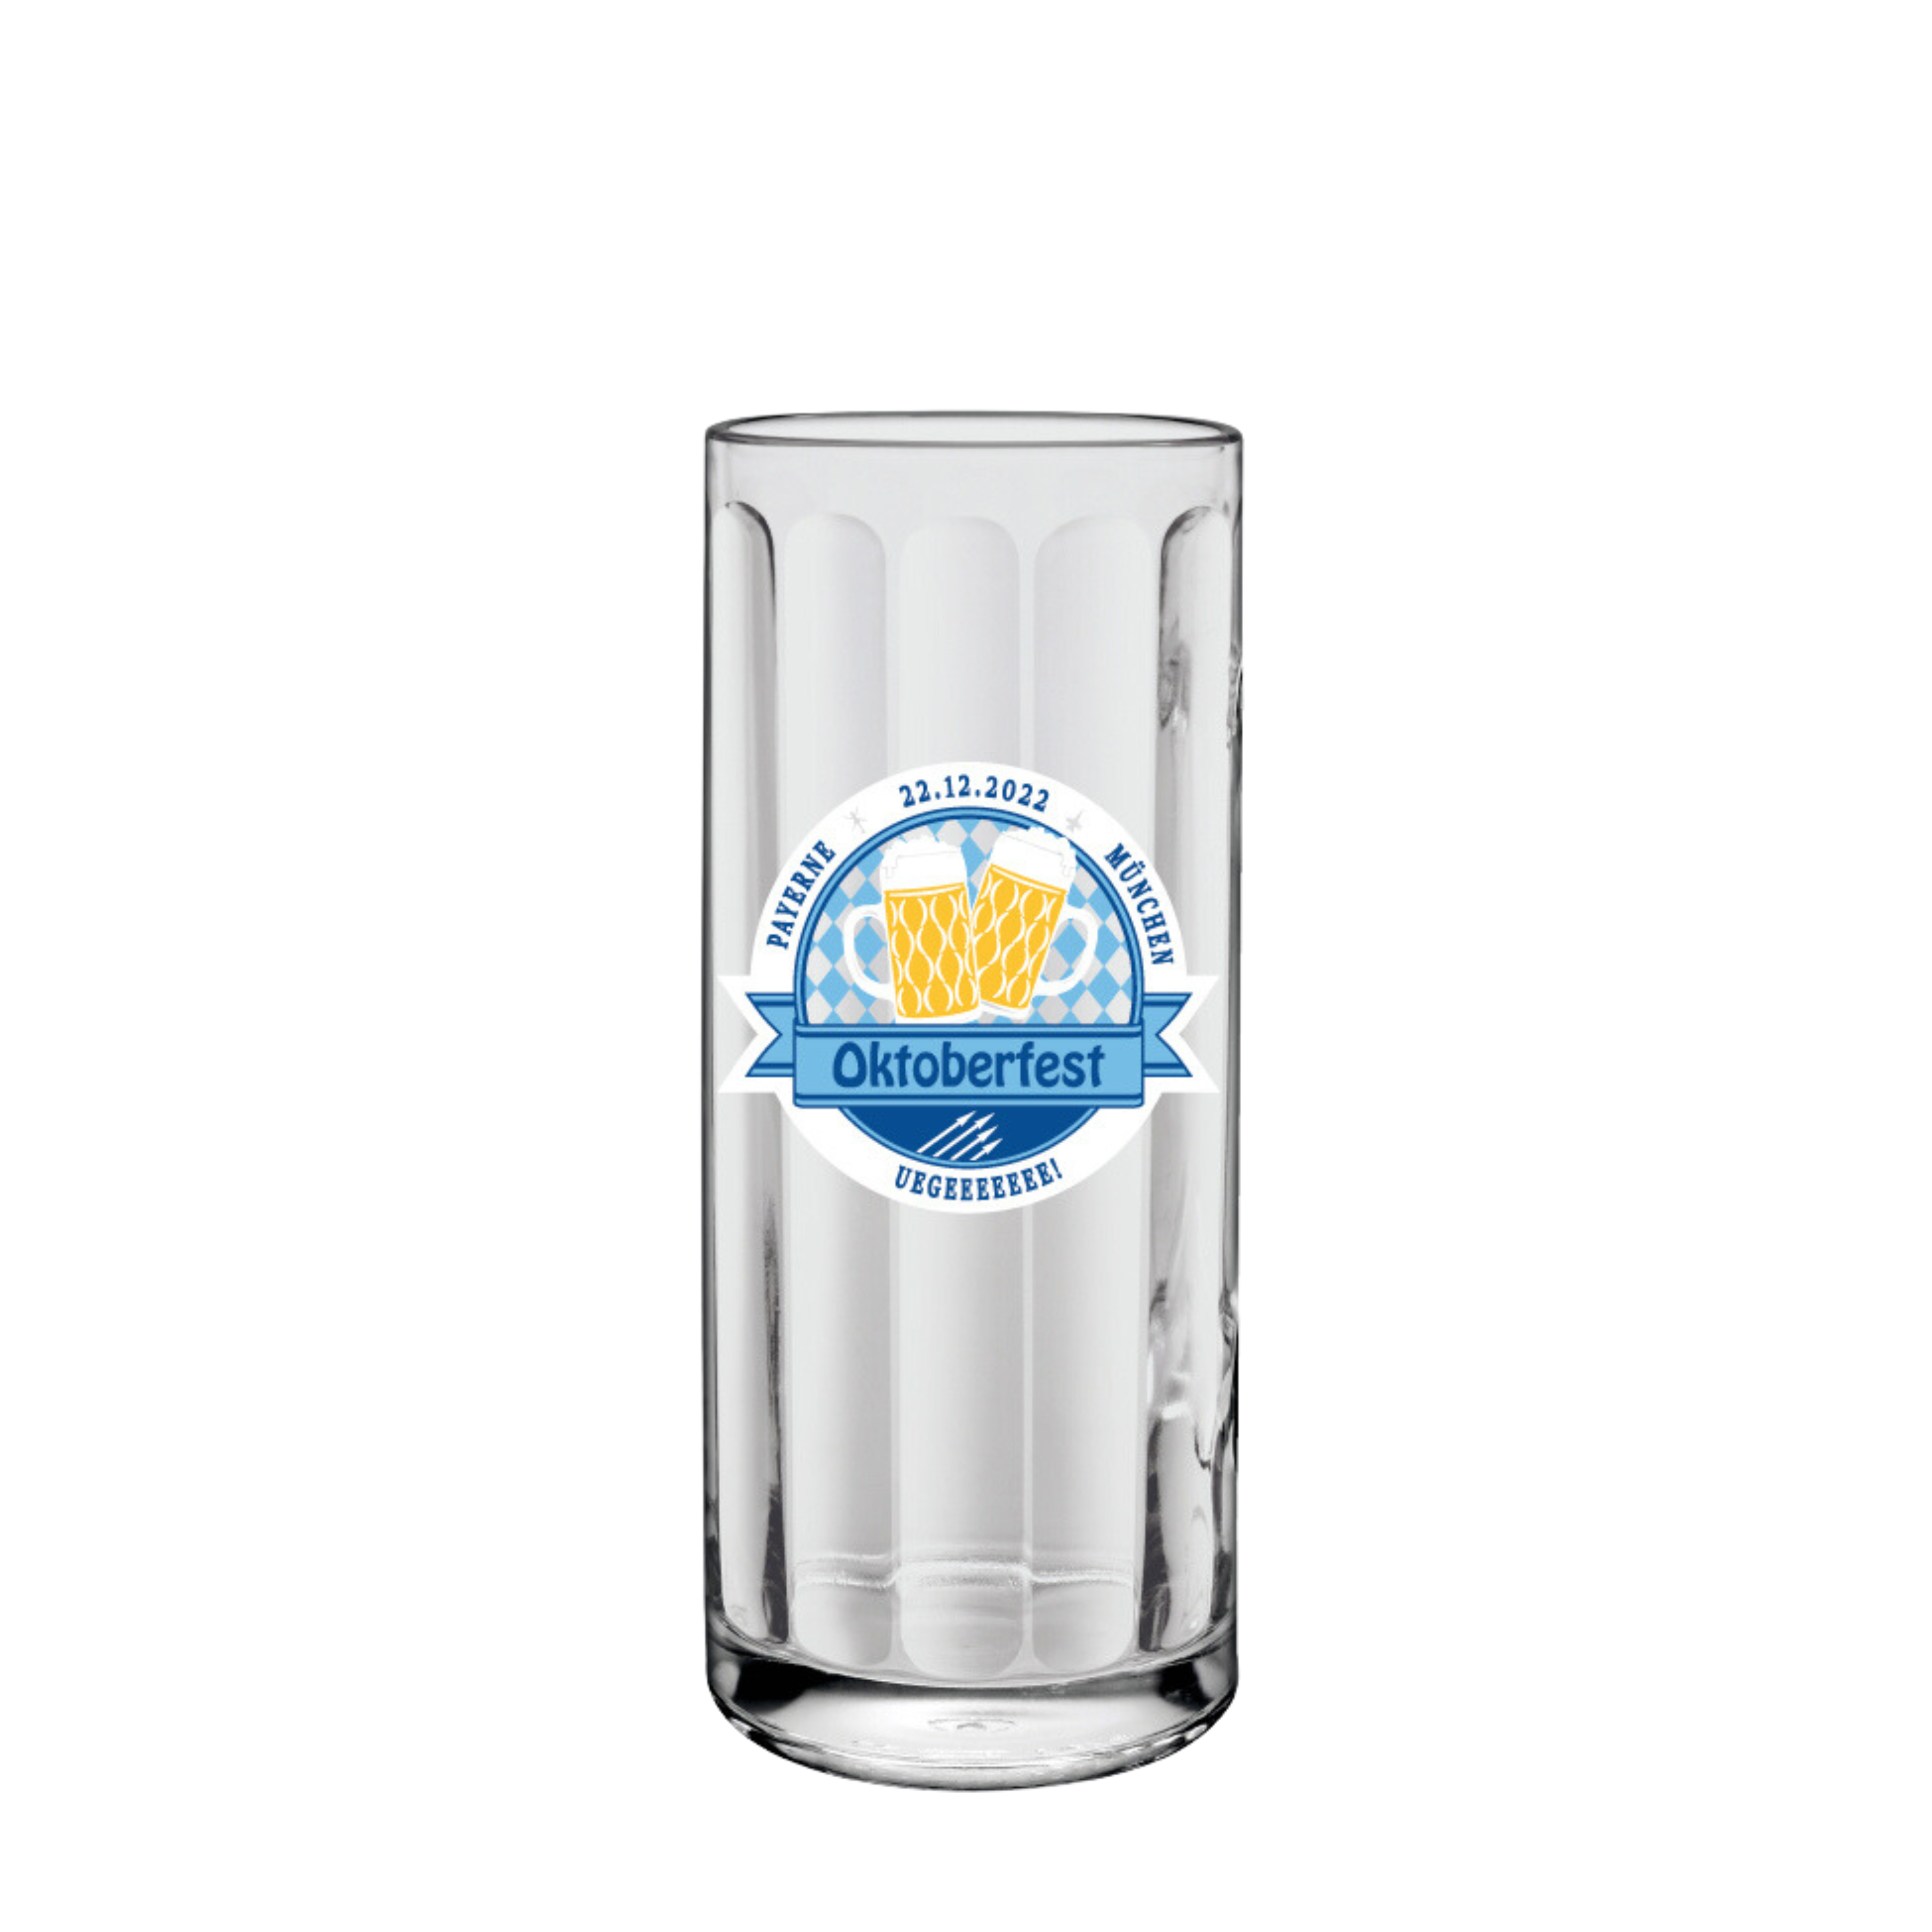 Personalised beer glass with graphic design of oktoberfest.